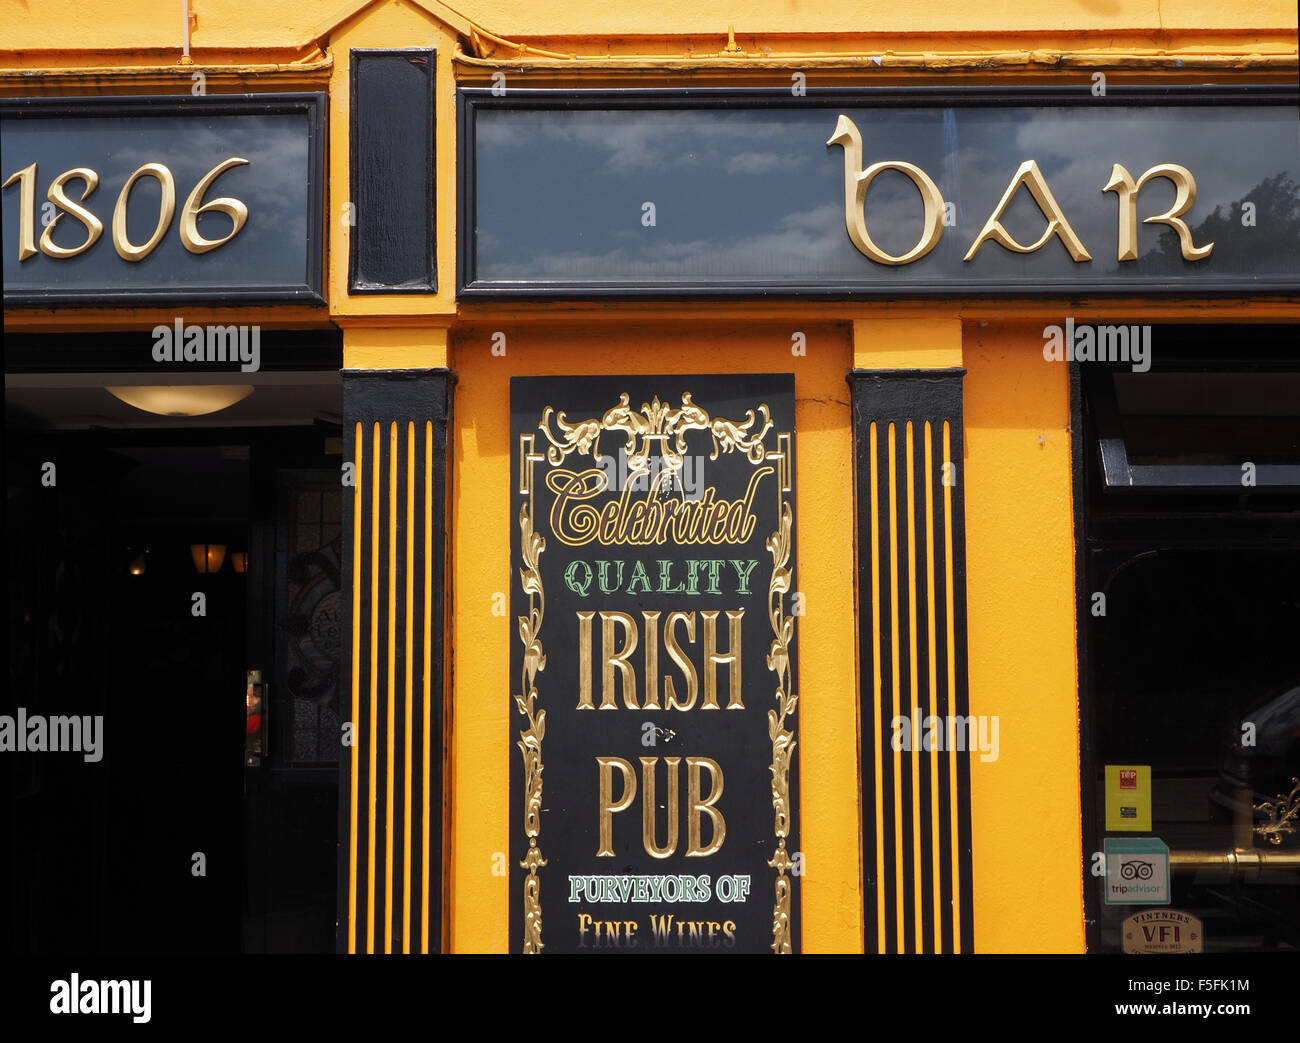 Colourful frontage to celebrated quality Irish Pub with date 1806 in Dingle town County Kerry Ireland Stock Photo